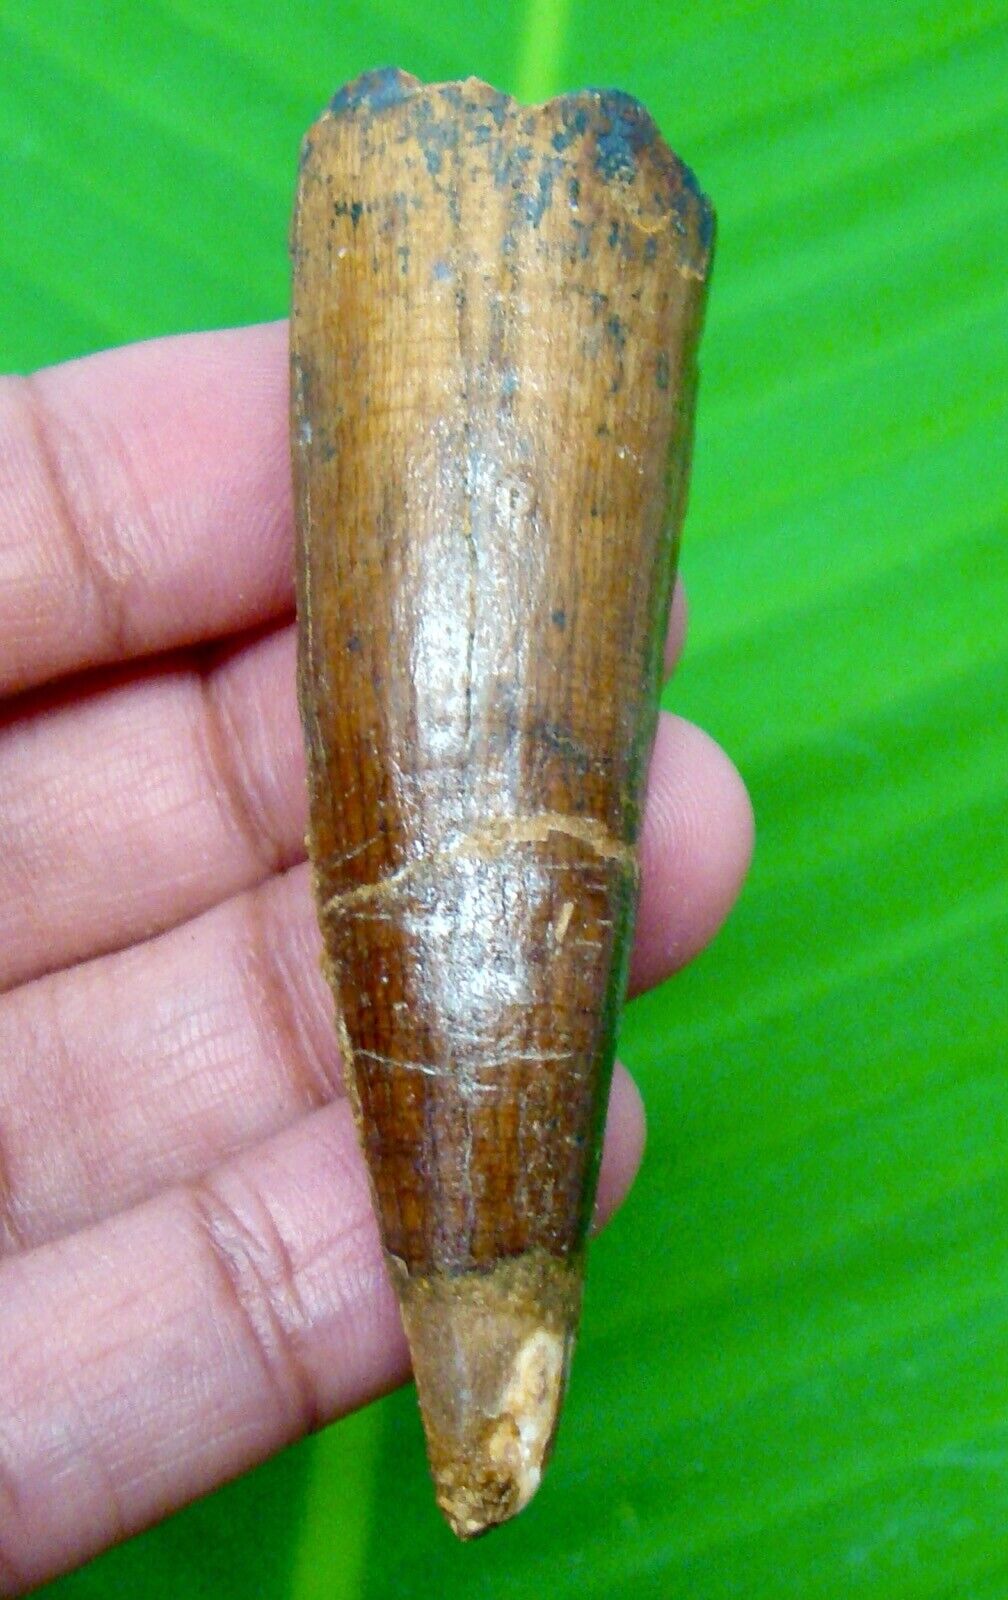 SPINOSAURUS DINOSAUR TOOTH - 2.62 INCHES - REAL FOSSIL - MOROCCO FOSSIL